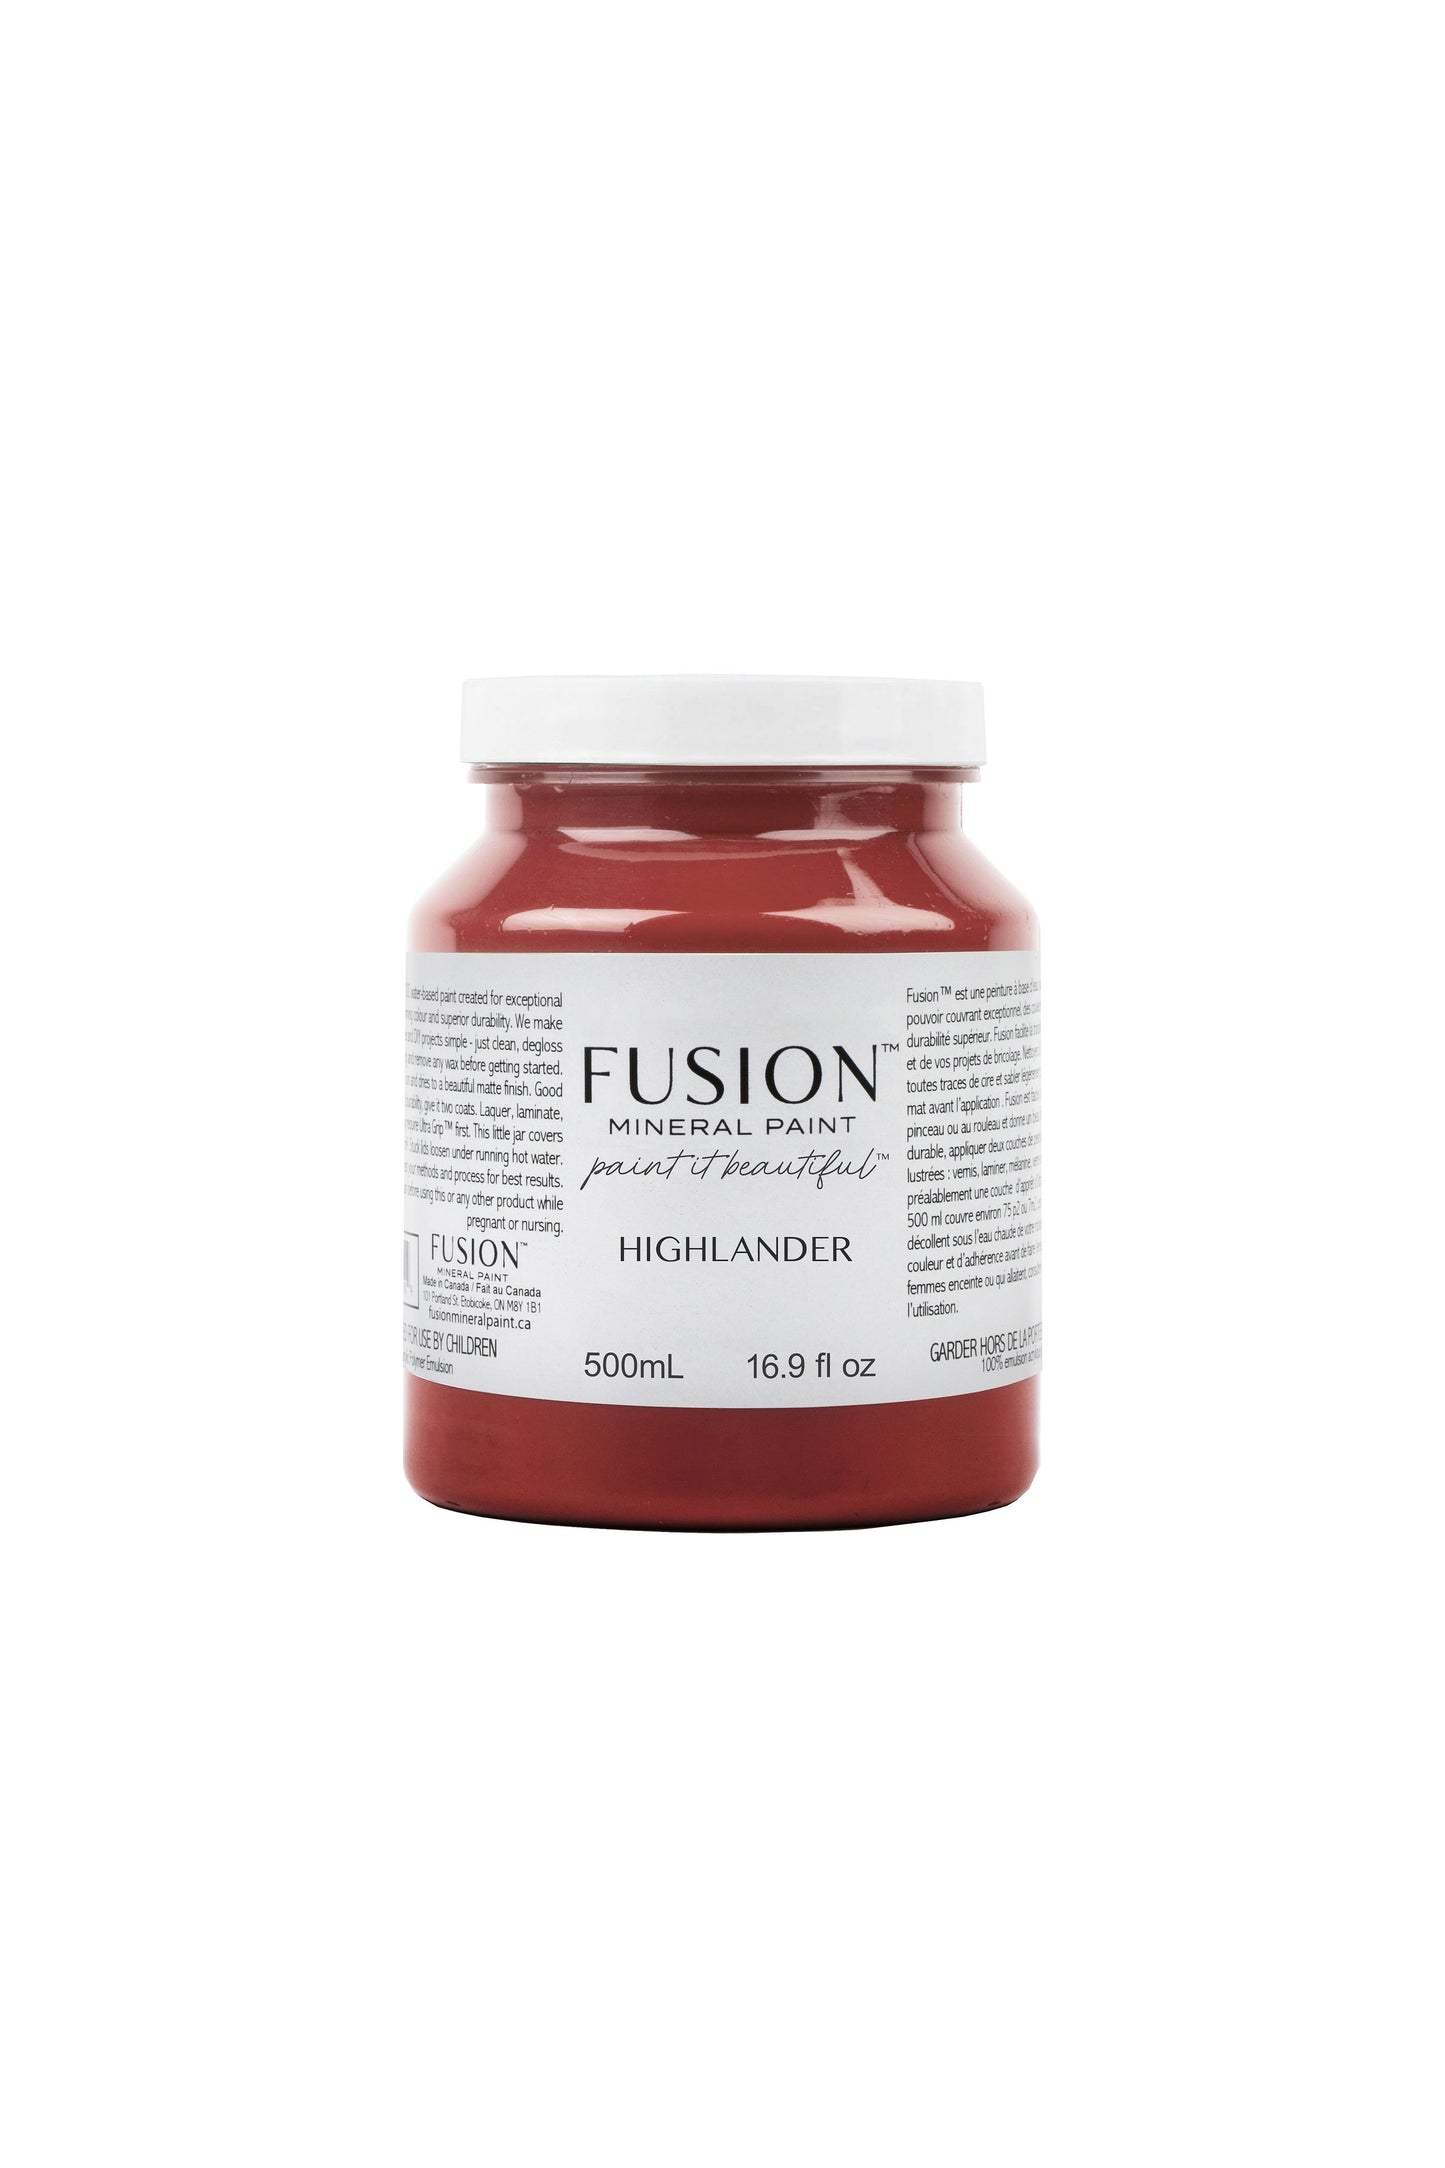 Highlander Fusion Mineral Paint | 500ml Pint Size